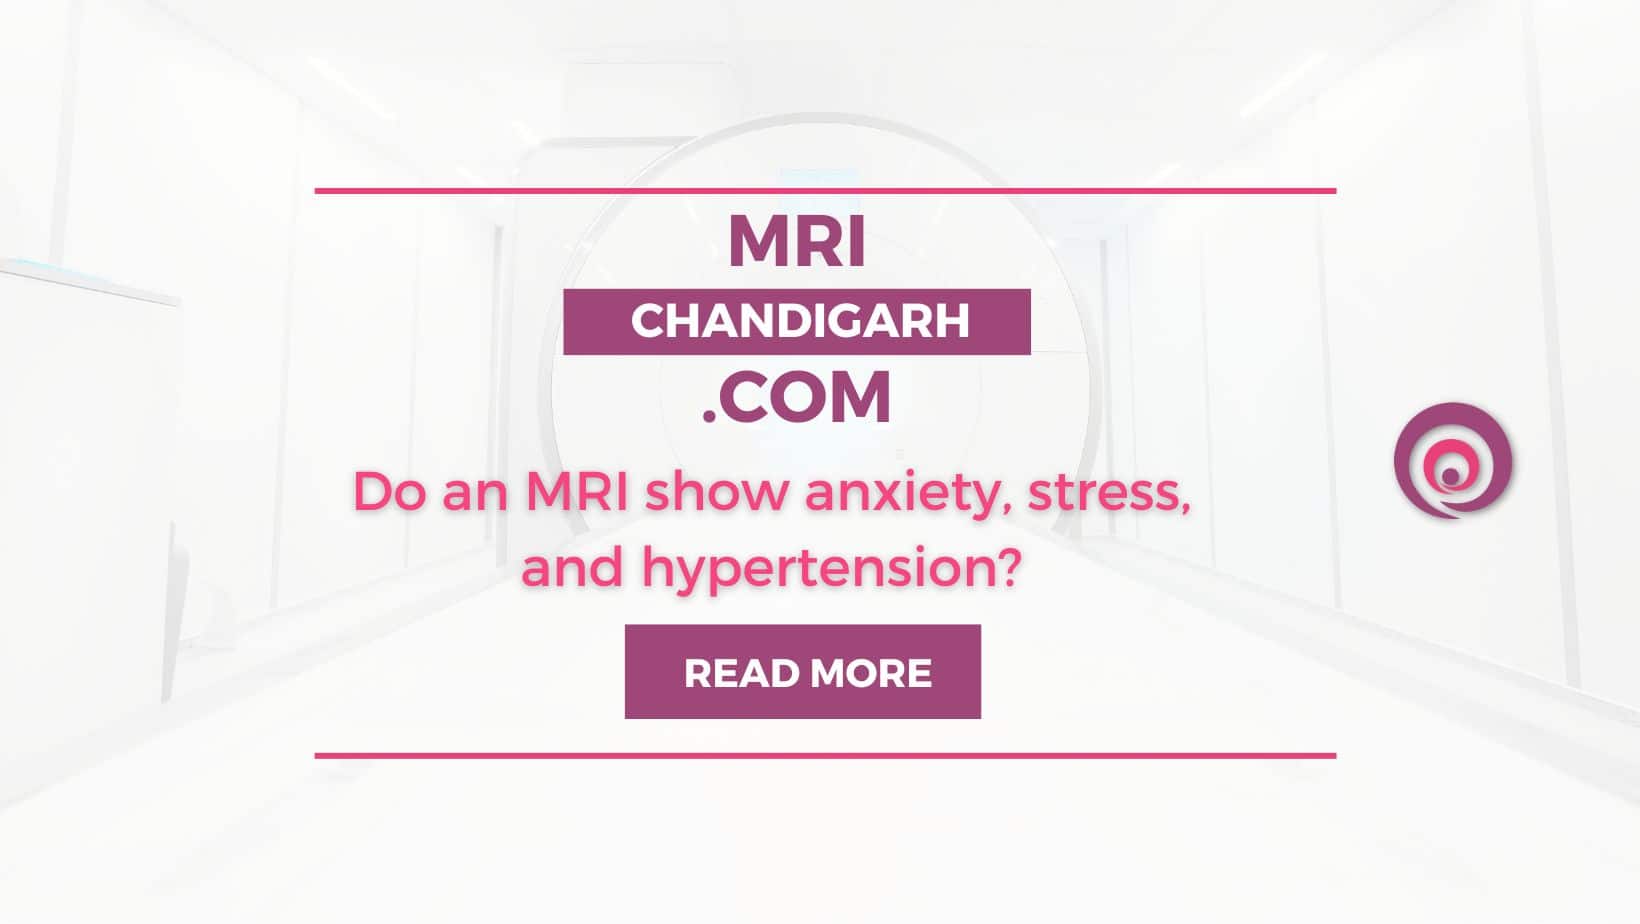 Do an MRI show anxiety, stress, and hypertension?